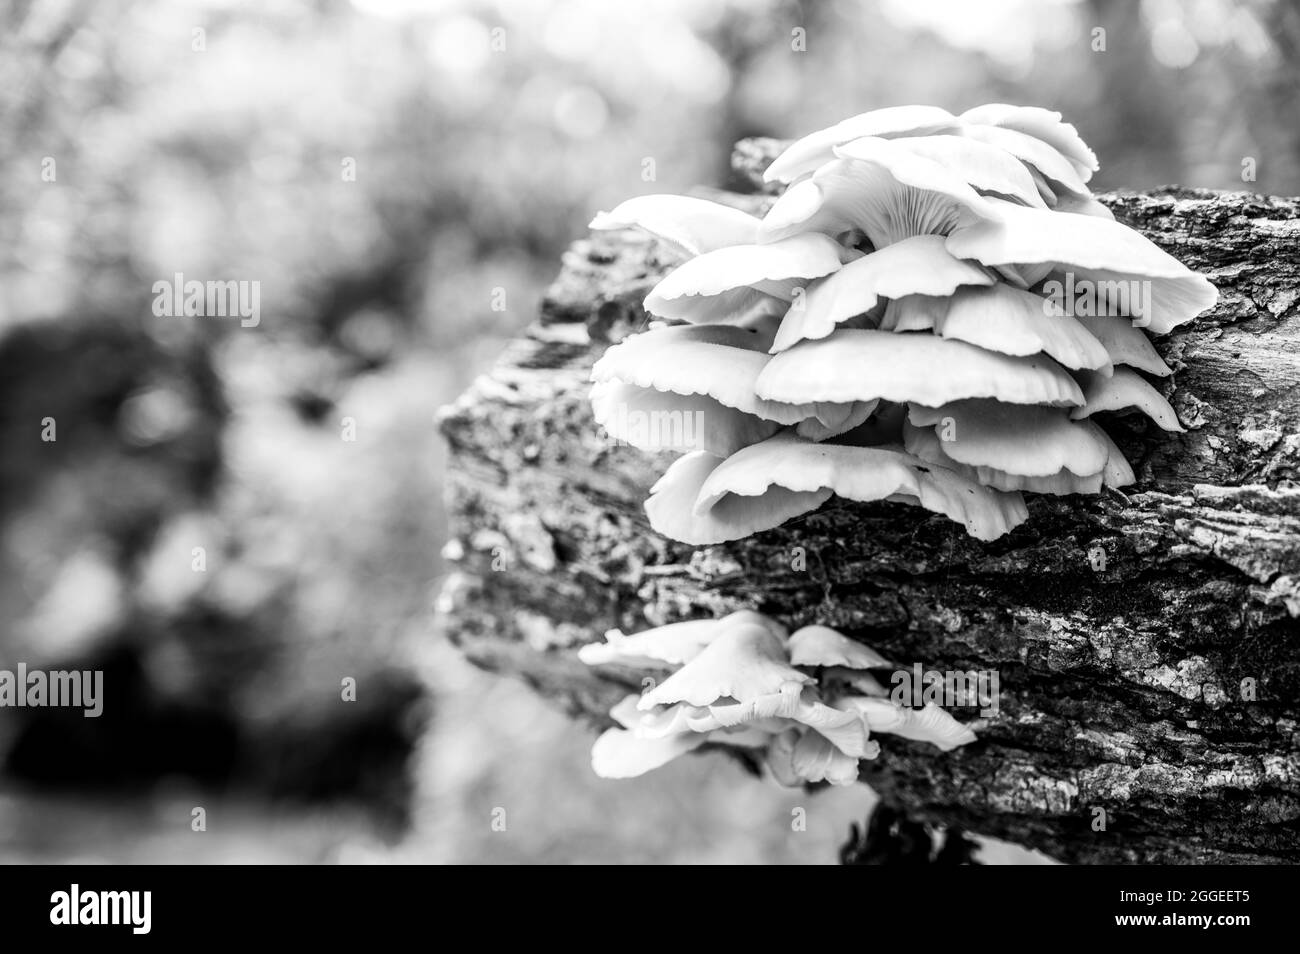 White Oyster Mushrooms growing on a decaying log in a forest Stock Photo